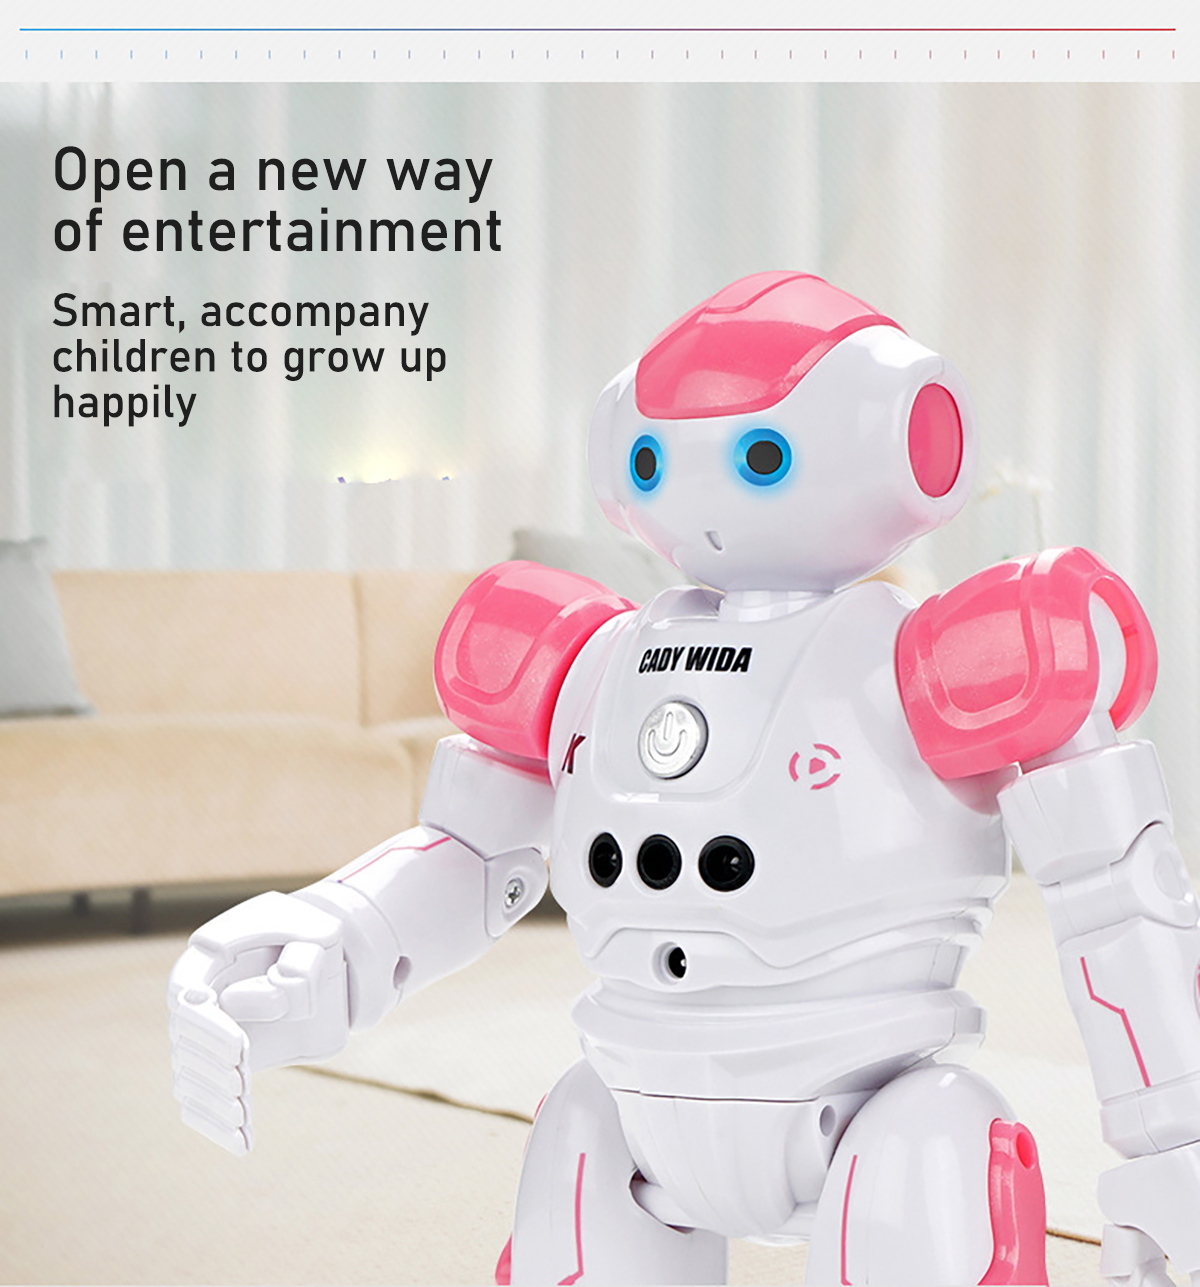 JJRC-R2S-Remote-Control-Programming-Gesture-Induction-Dancing-Robot-1887329-6